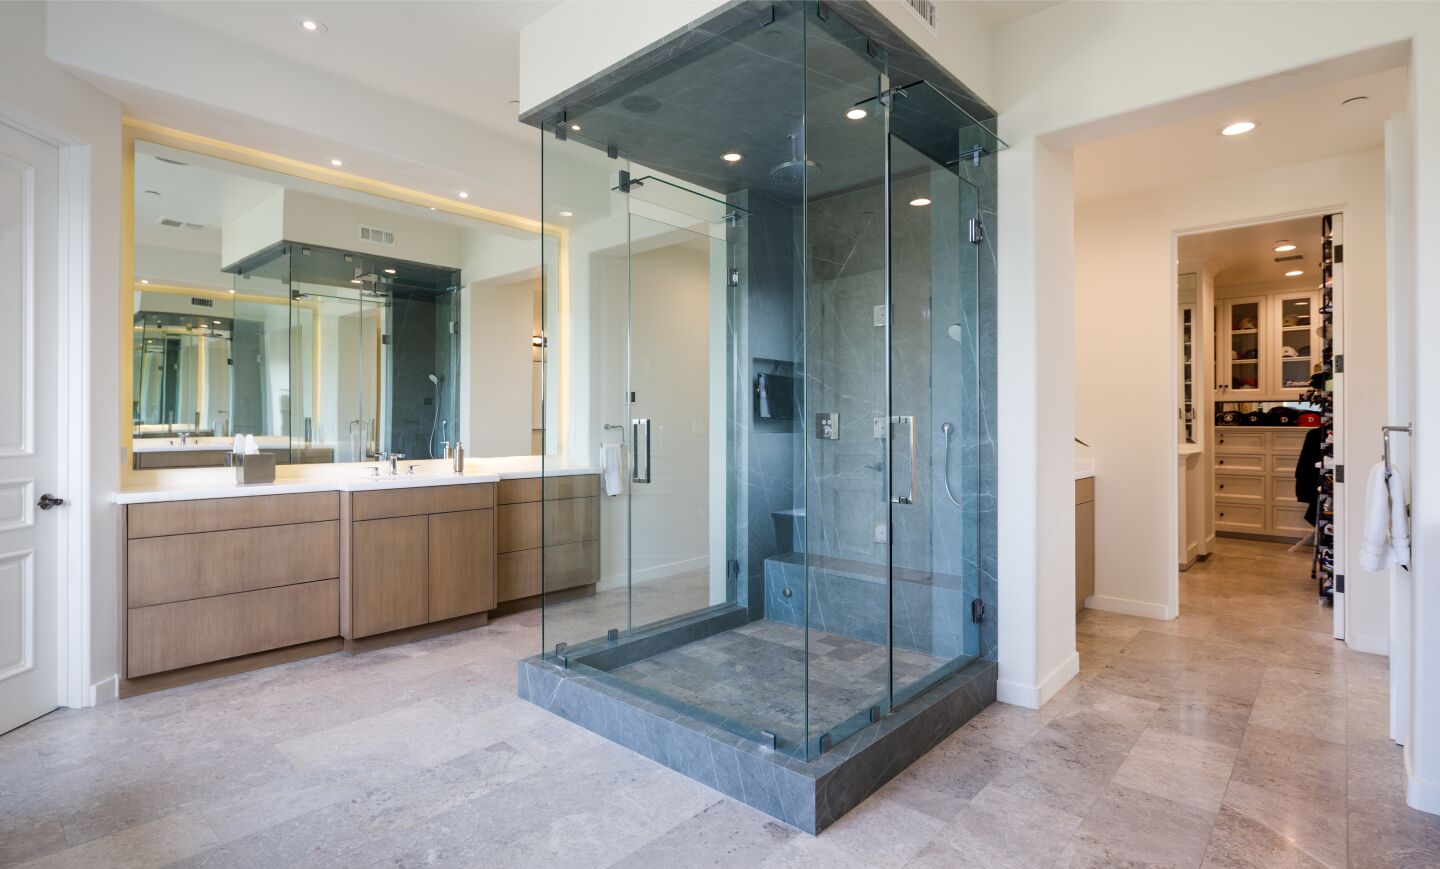 A shower with three glass walls extends from a wall.